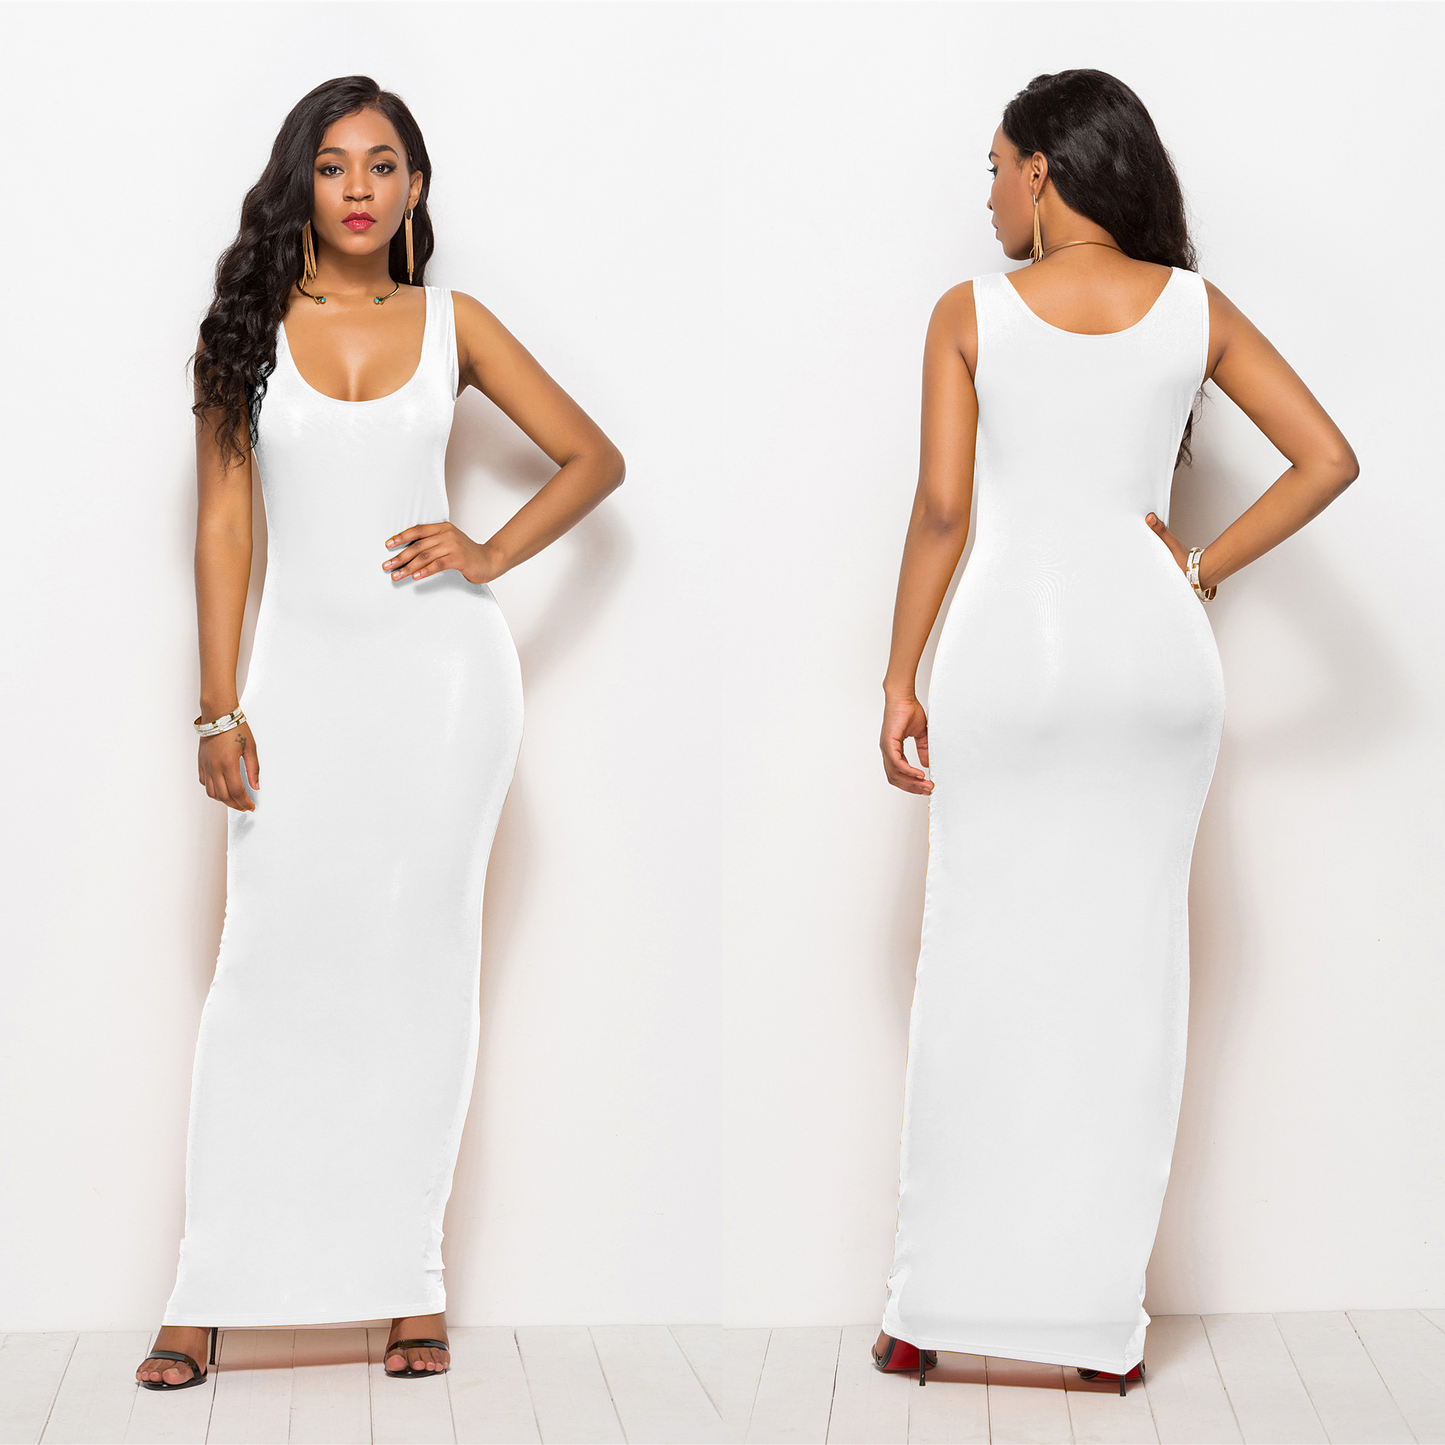 Women Basic Solid Color Sleeveless Sling Casual Maxi Dress